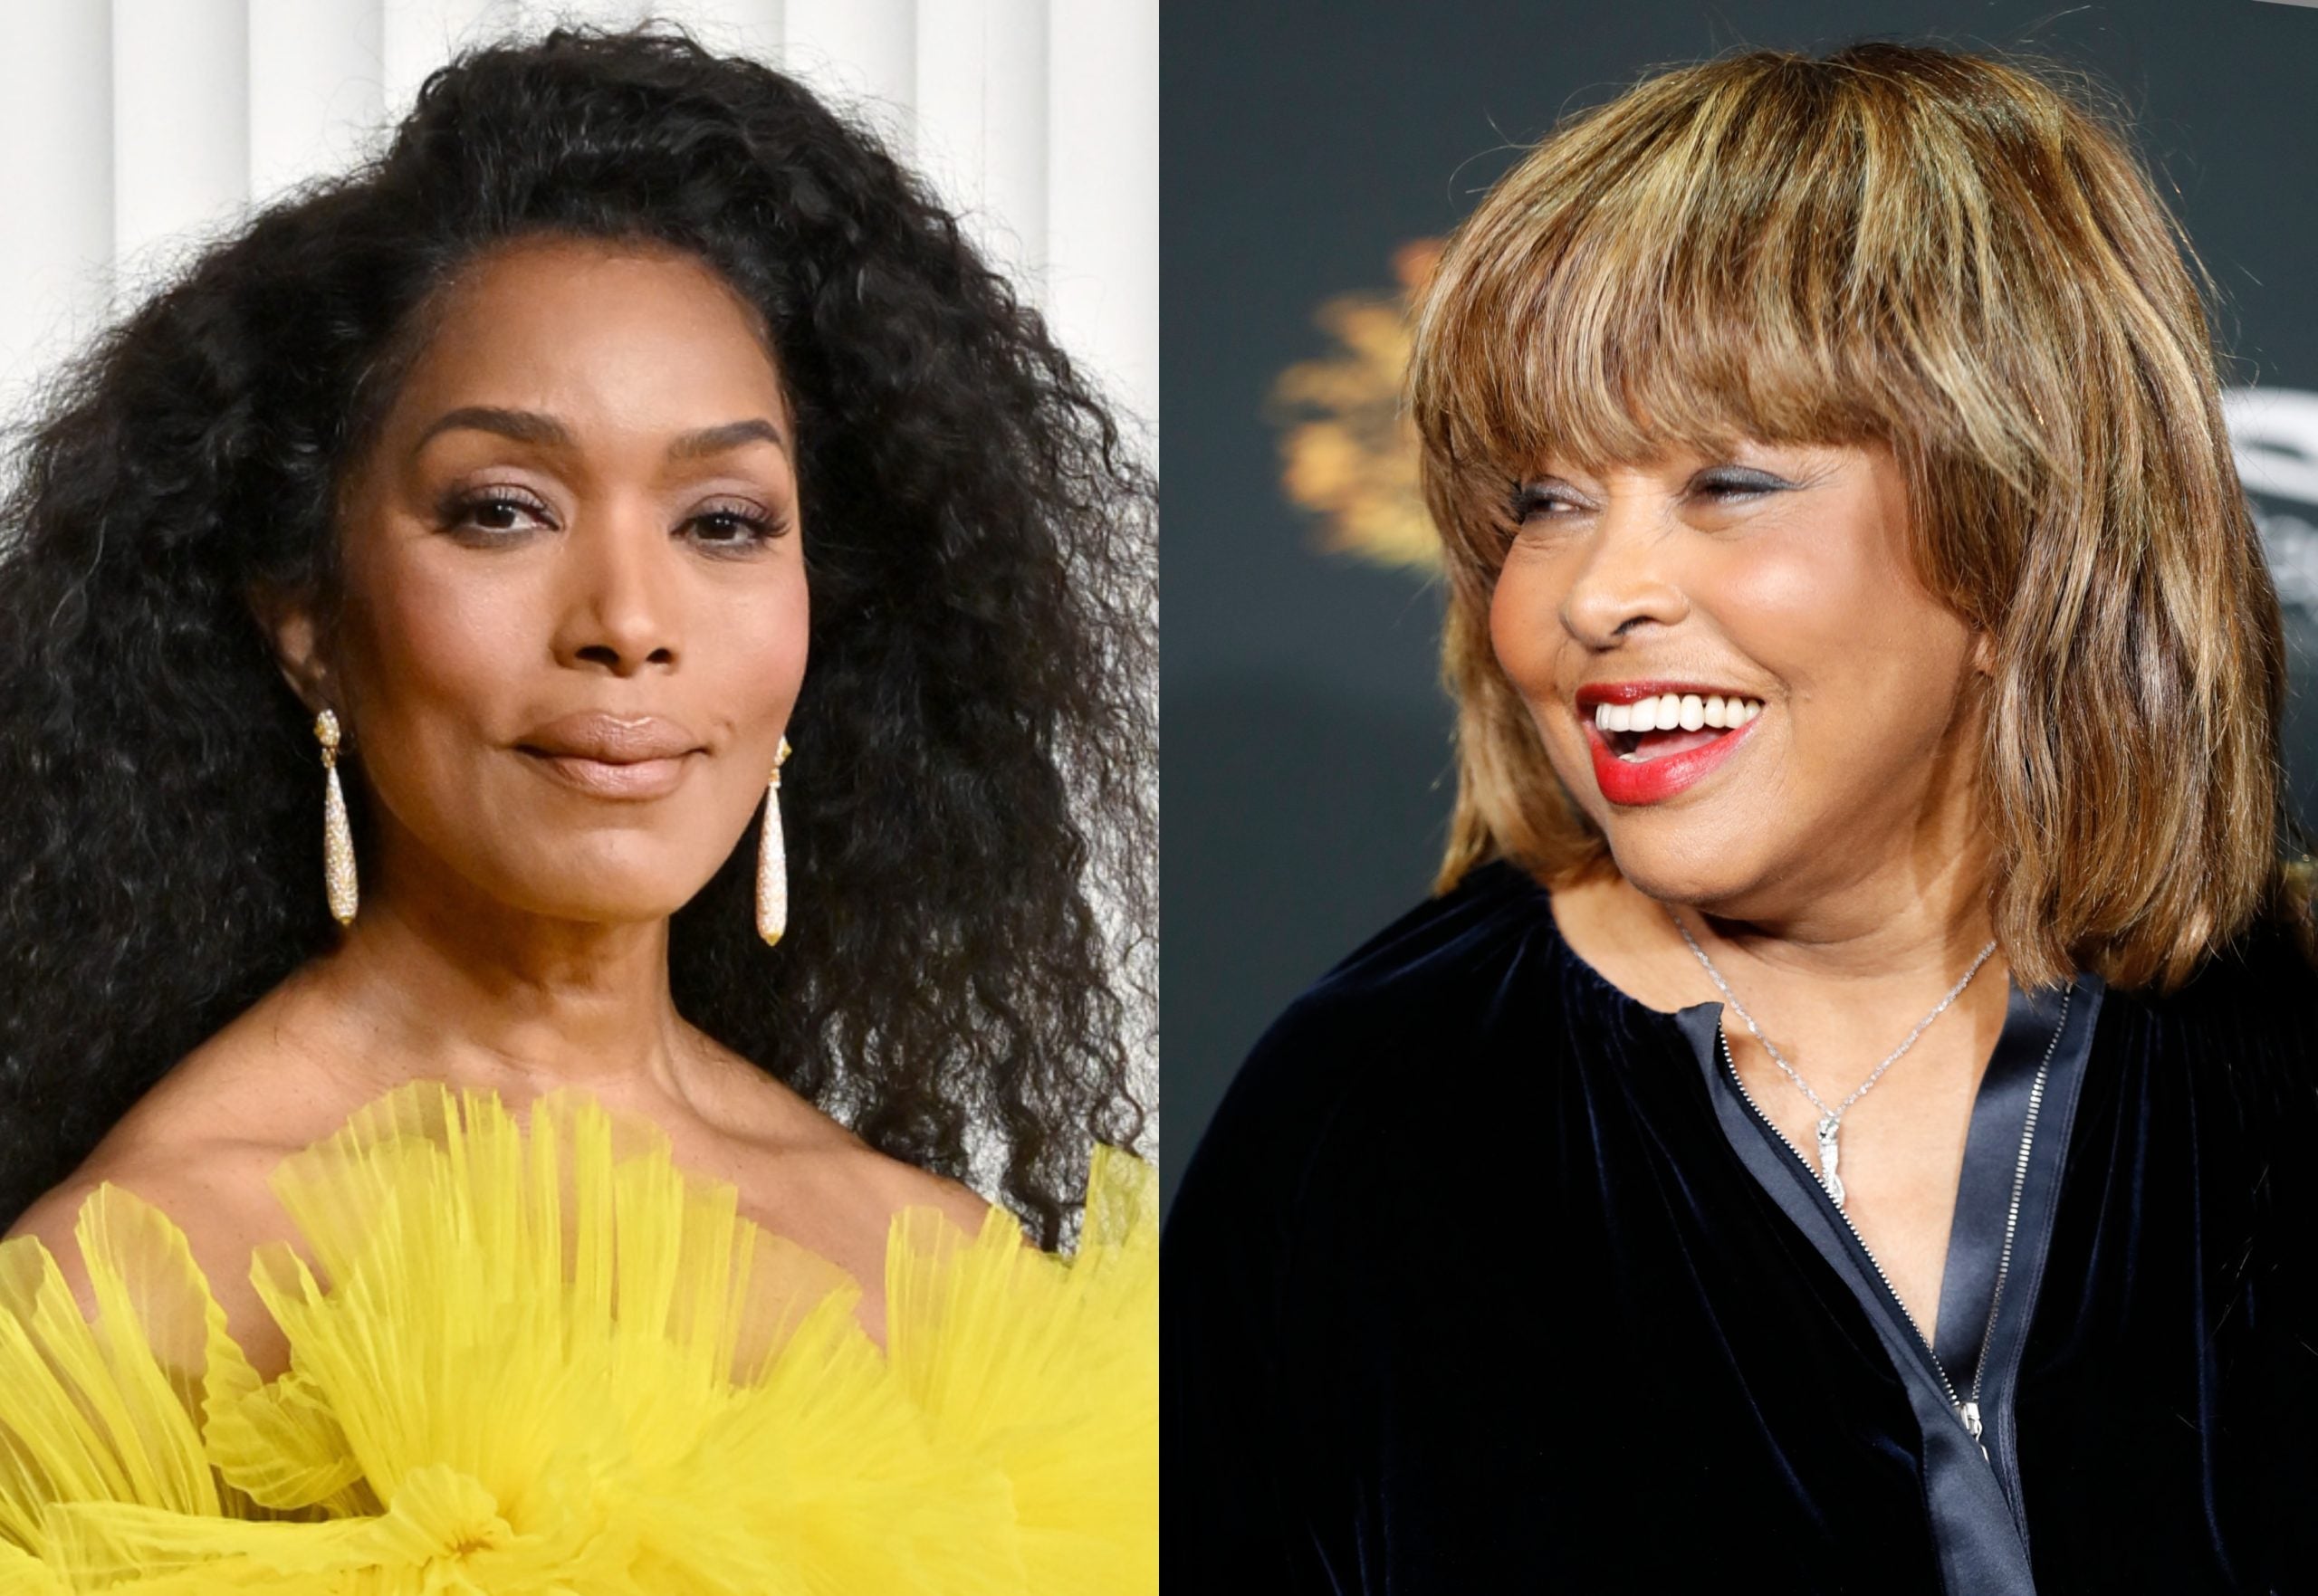 Angela Bassett Speaks Out On The Passing Of Tina Turner: "She Gave Us Her Whole Self"